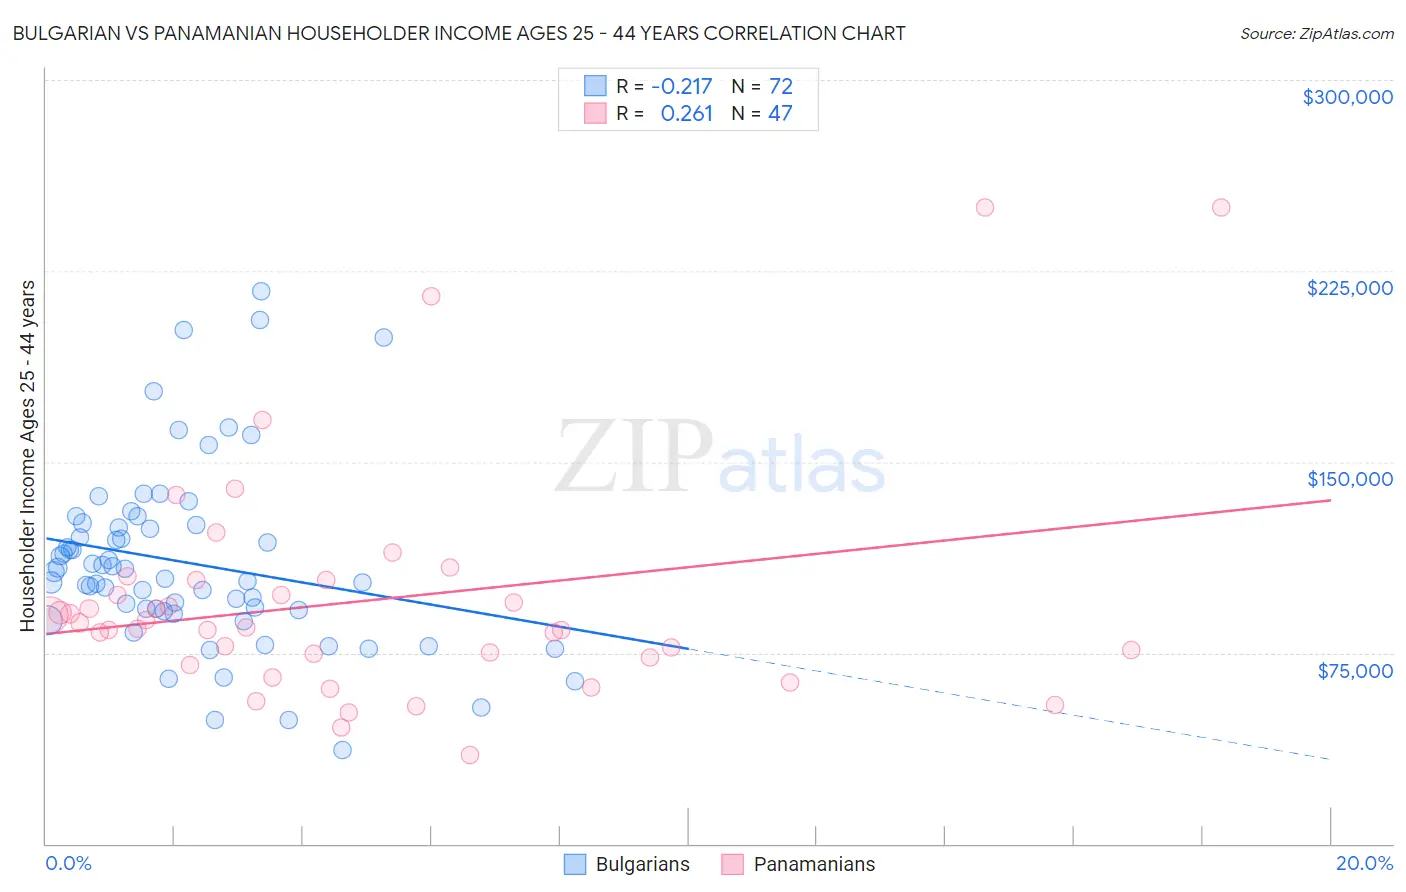 Bulgarian vs Panamanian Householder Income Ages 25 - 44 years